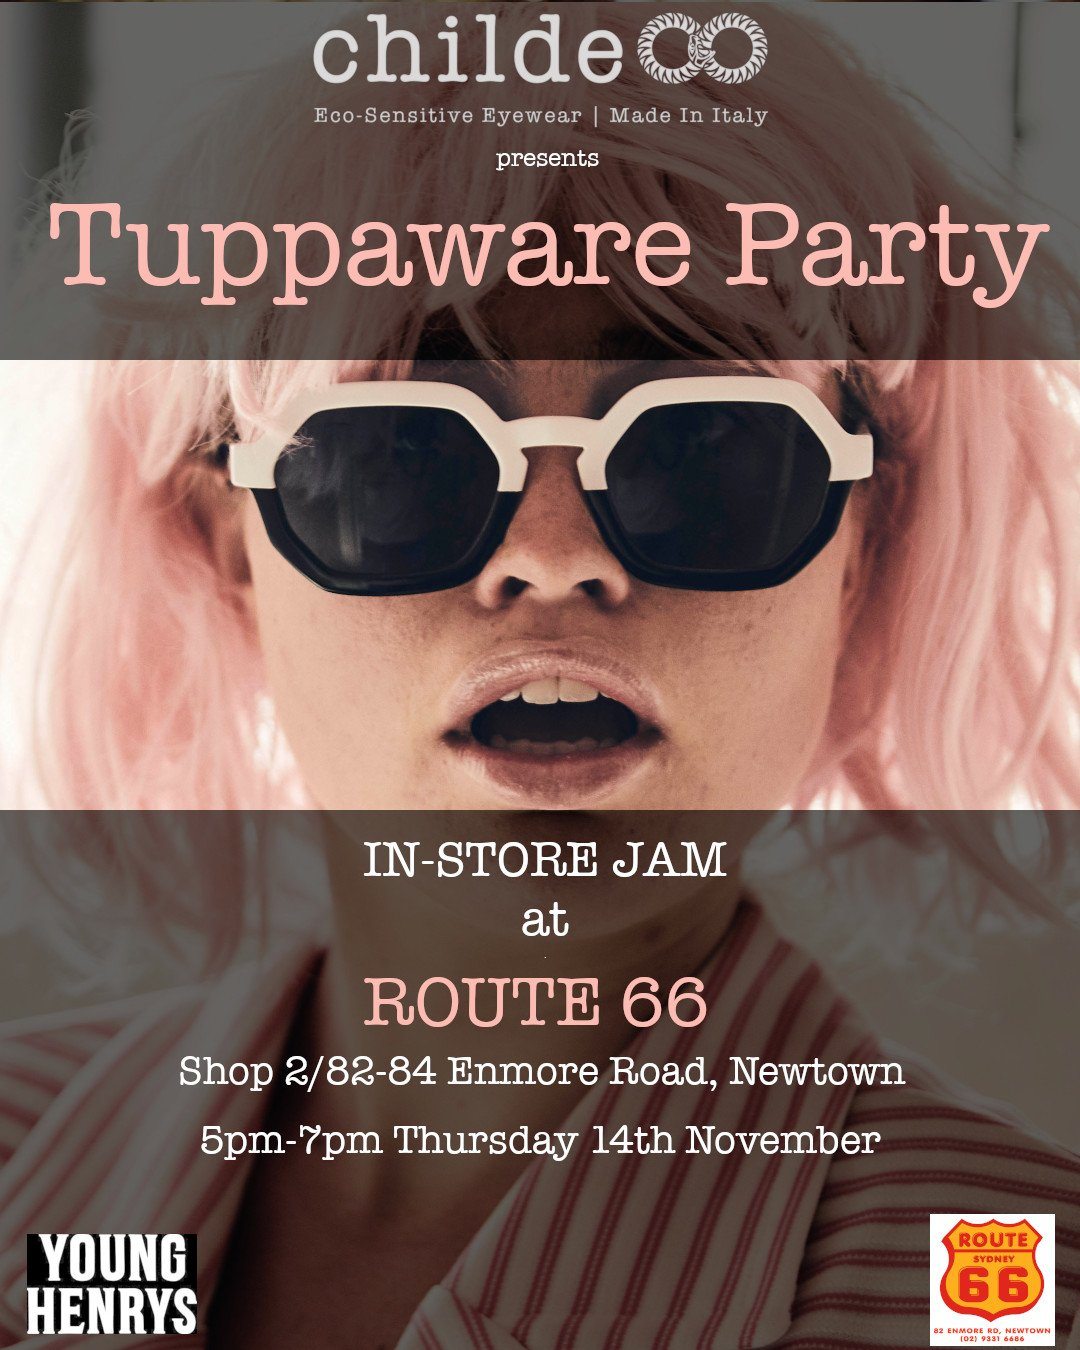 Tuppaware Party Route 66 Newtown in store gig this Thursday